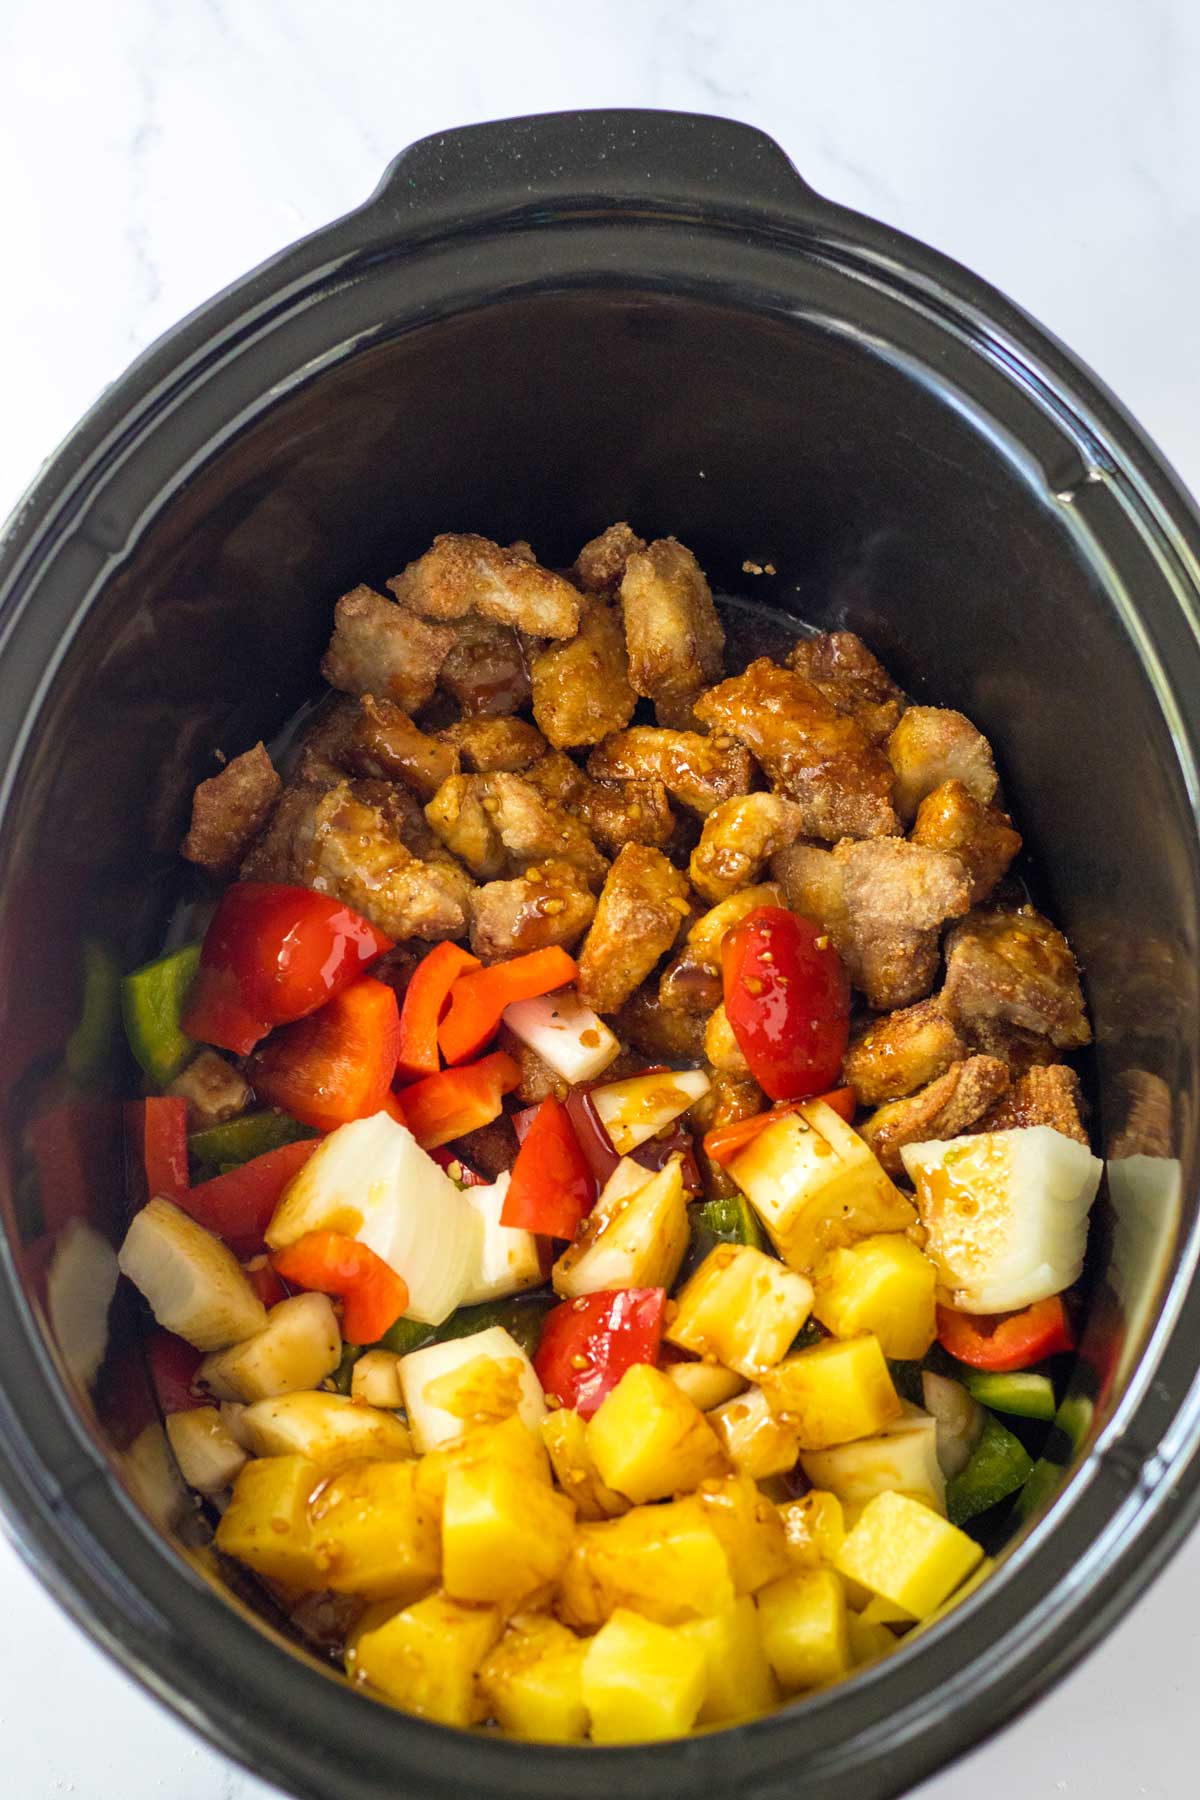 Adding the veggies and pork to the crockpot is a part of Slow Cooker Sweet and Sour Pork